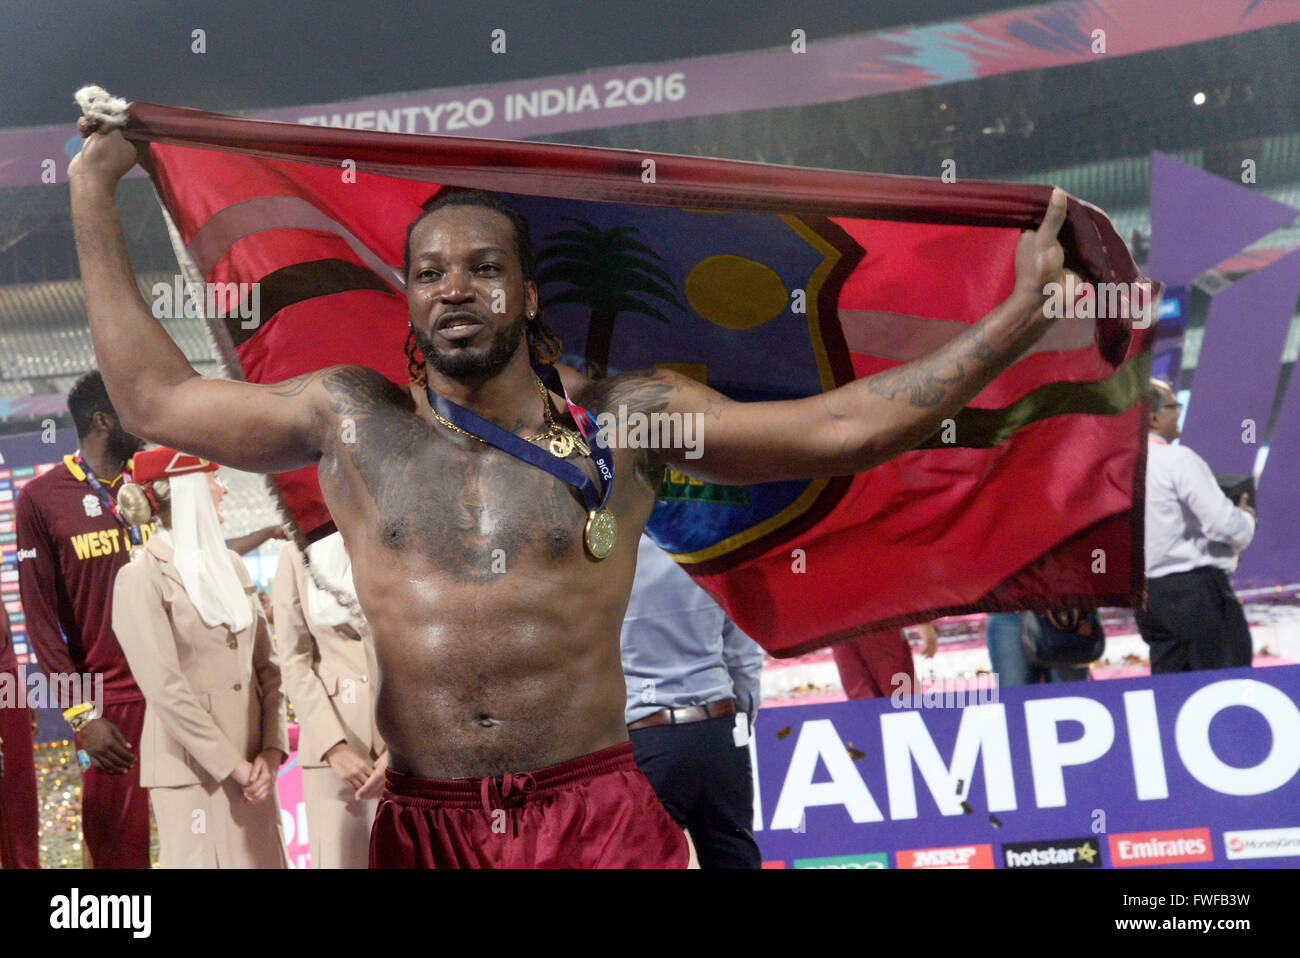 Chris Gayle celebrates West Indies World T20 final win with West Indies flag during ICC World T20 final match. West Indies beat England by four wickets in ICC T20 final at Eden Gardens, Kolkata. England batted first and scored 155 for 9 wickets by the help of Roots half century. Chasing the target West Indies win the game two delivers to left and four wickets in hand. Samuel score magnificent 85 and Brathwaite scored not out 34. Samuel grabs the player of the match award and India's Virat Kohli get player of player of the tournaments. (Photo by Saikat Paul/Pacific Press) Stock Photo